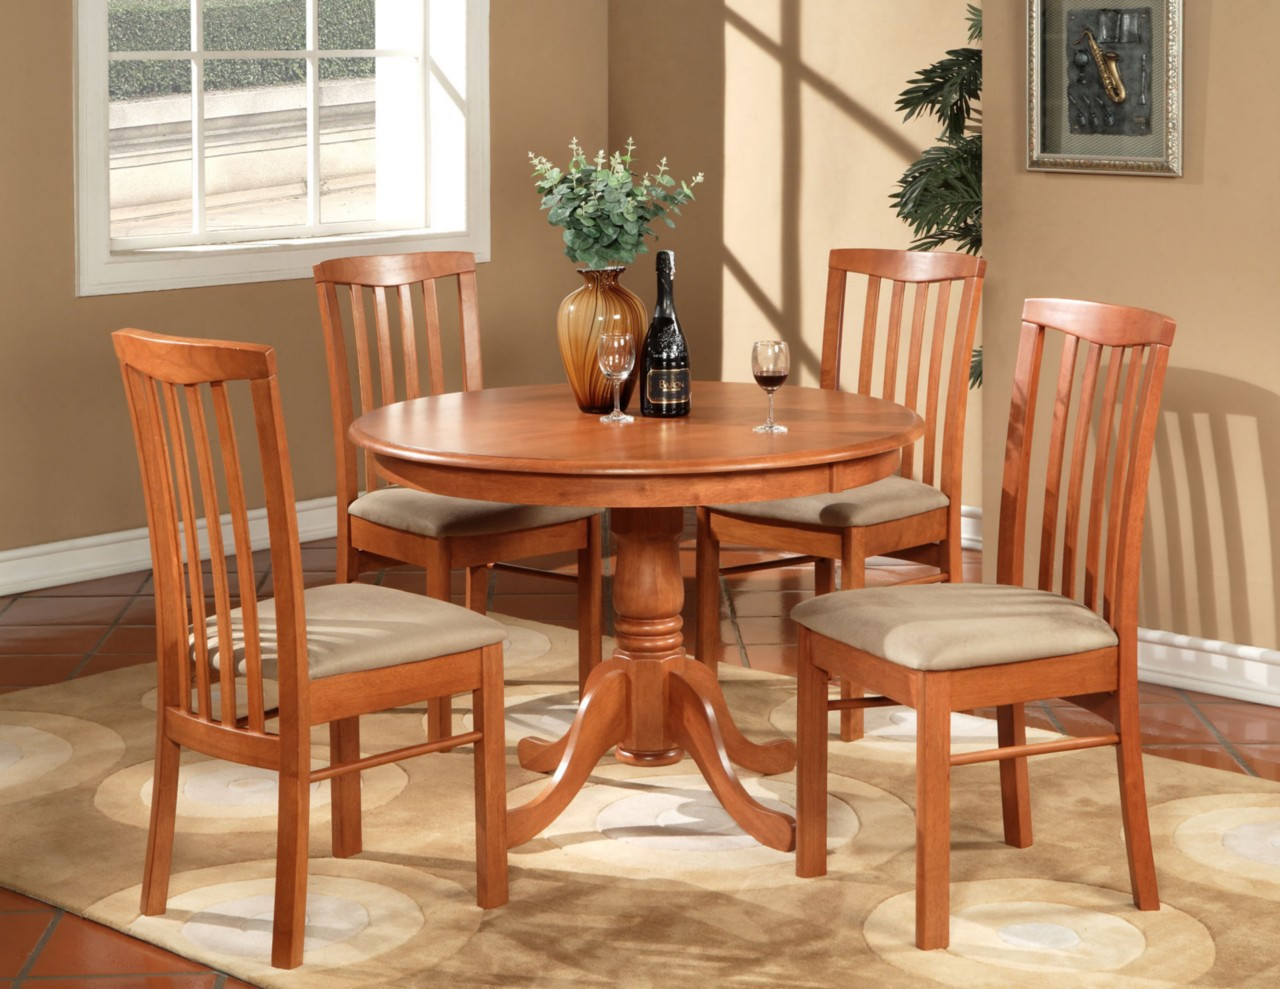 Small Round Kitchen Table Set
 kitchen table 4 chairs 2017 Grasscloth Wallpaper